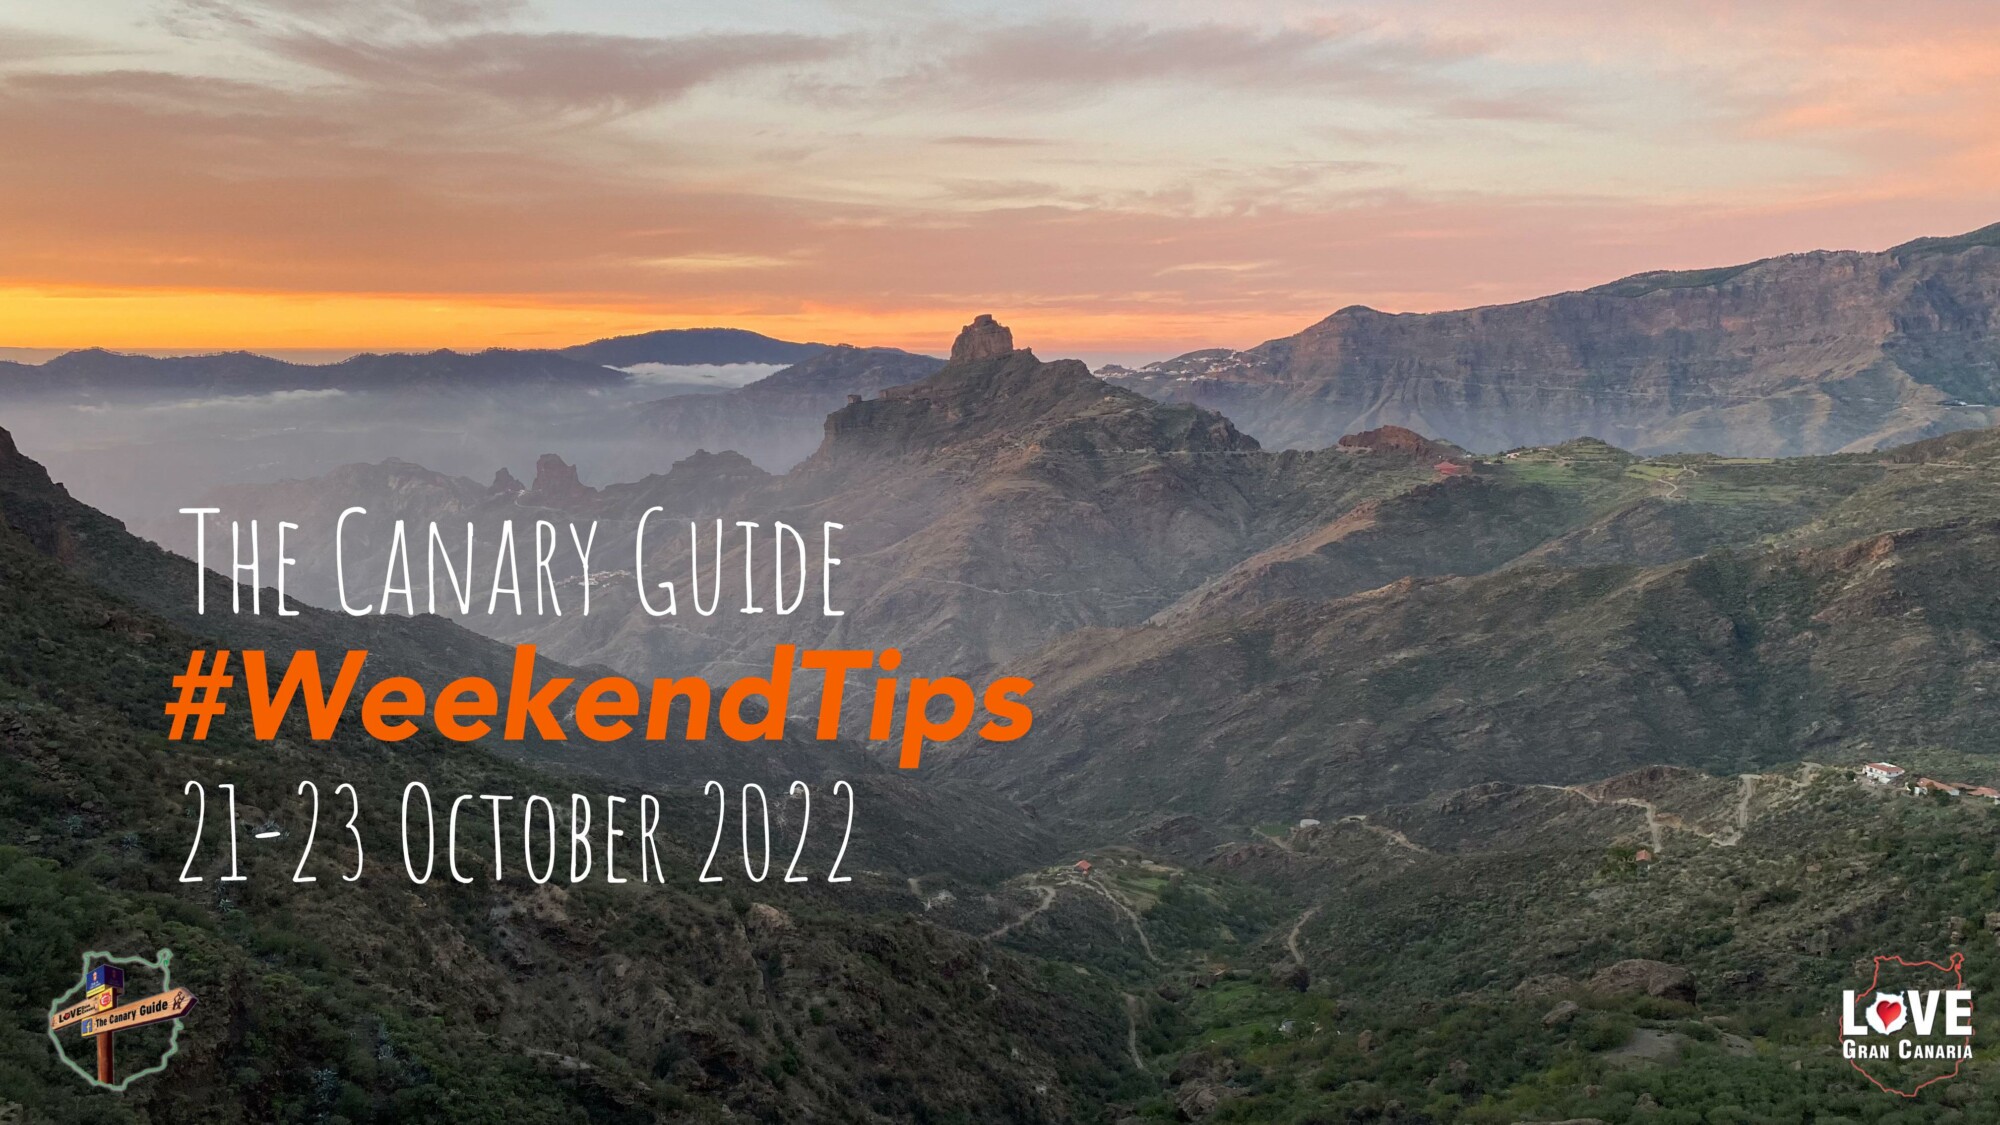 The Canary Guide #WeekendTips 21-23 October 2022